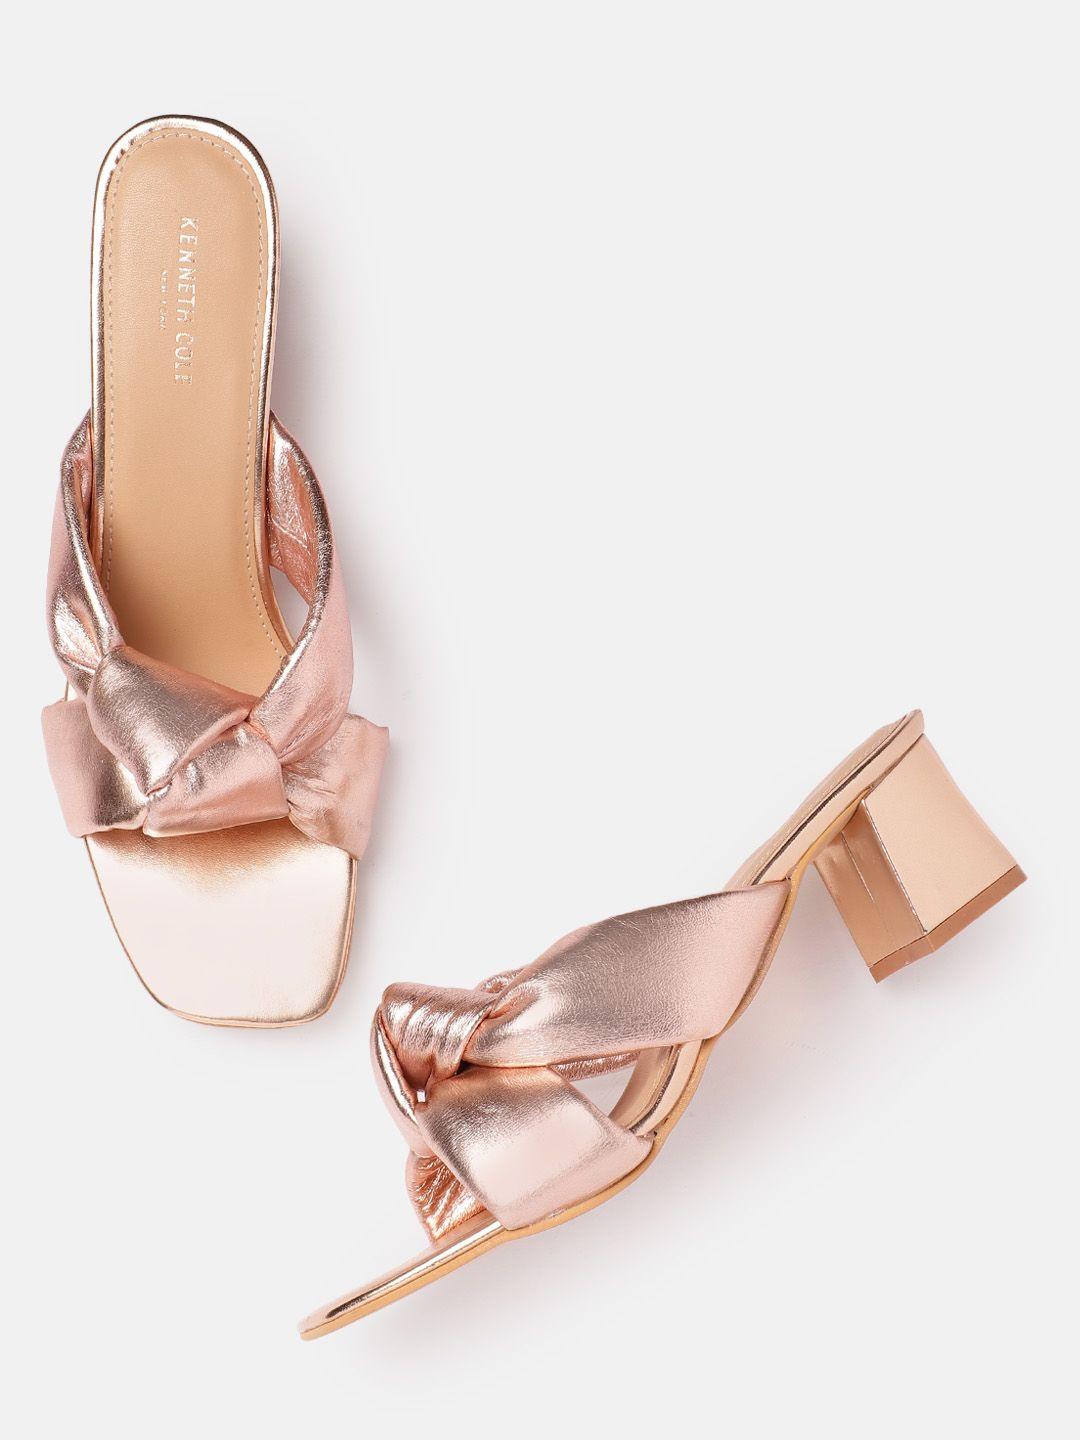 kenneth-cole-knot-detail-block-heels